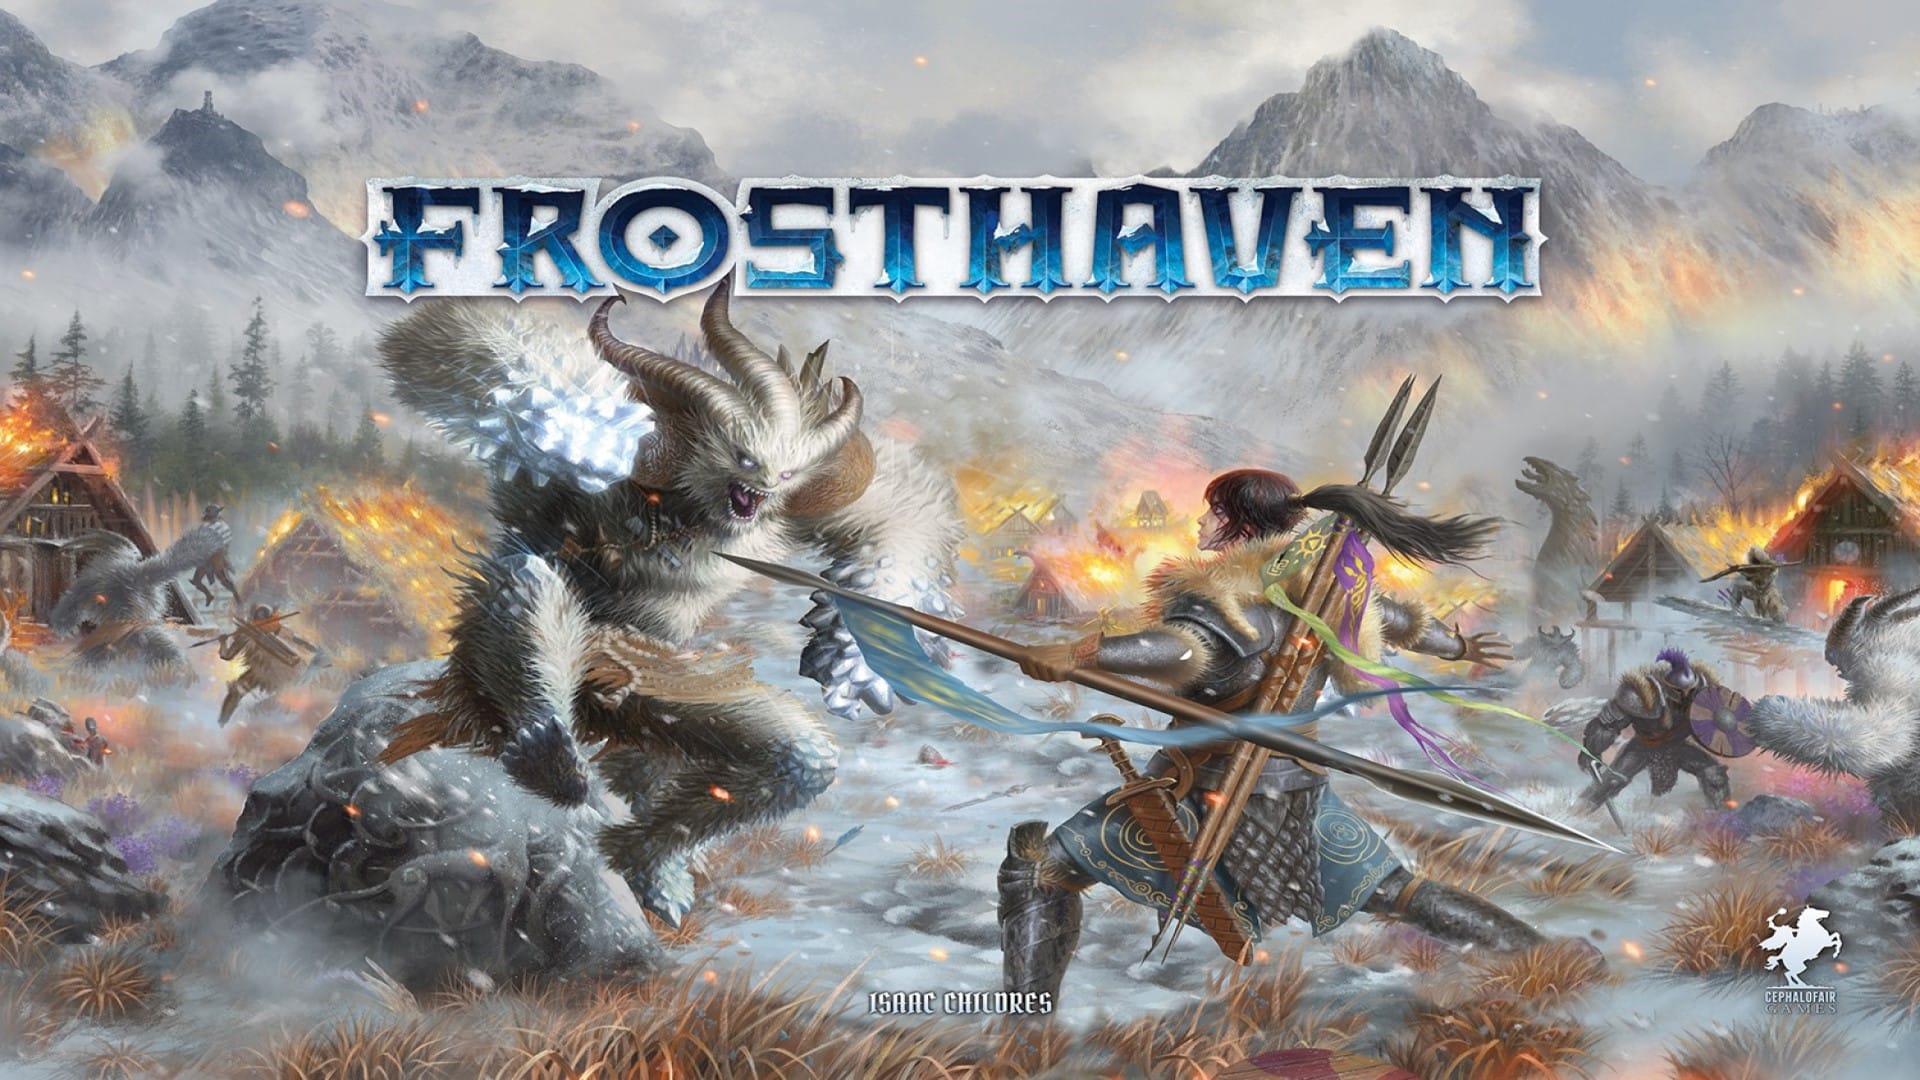 Artwork for Frosthaven showing a man fighting a frost giant